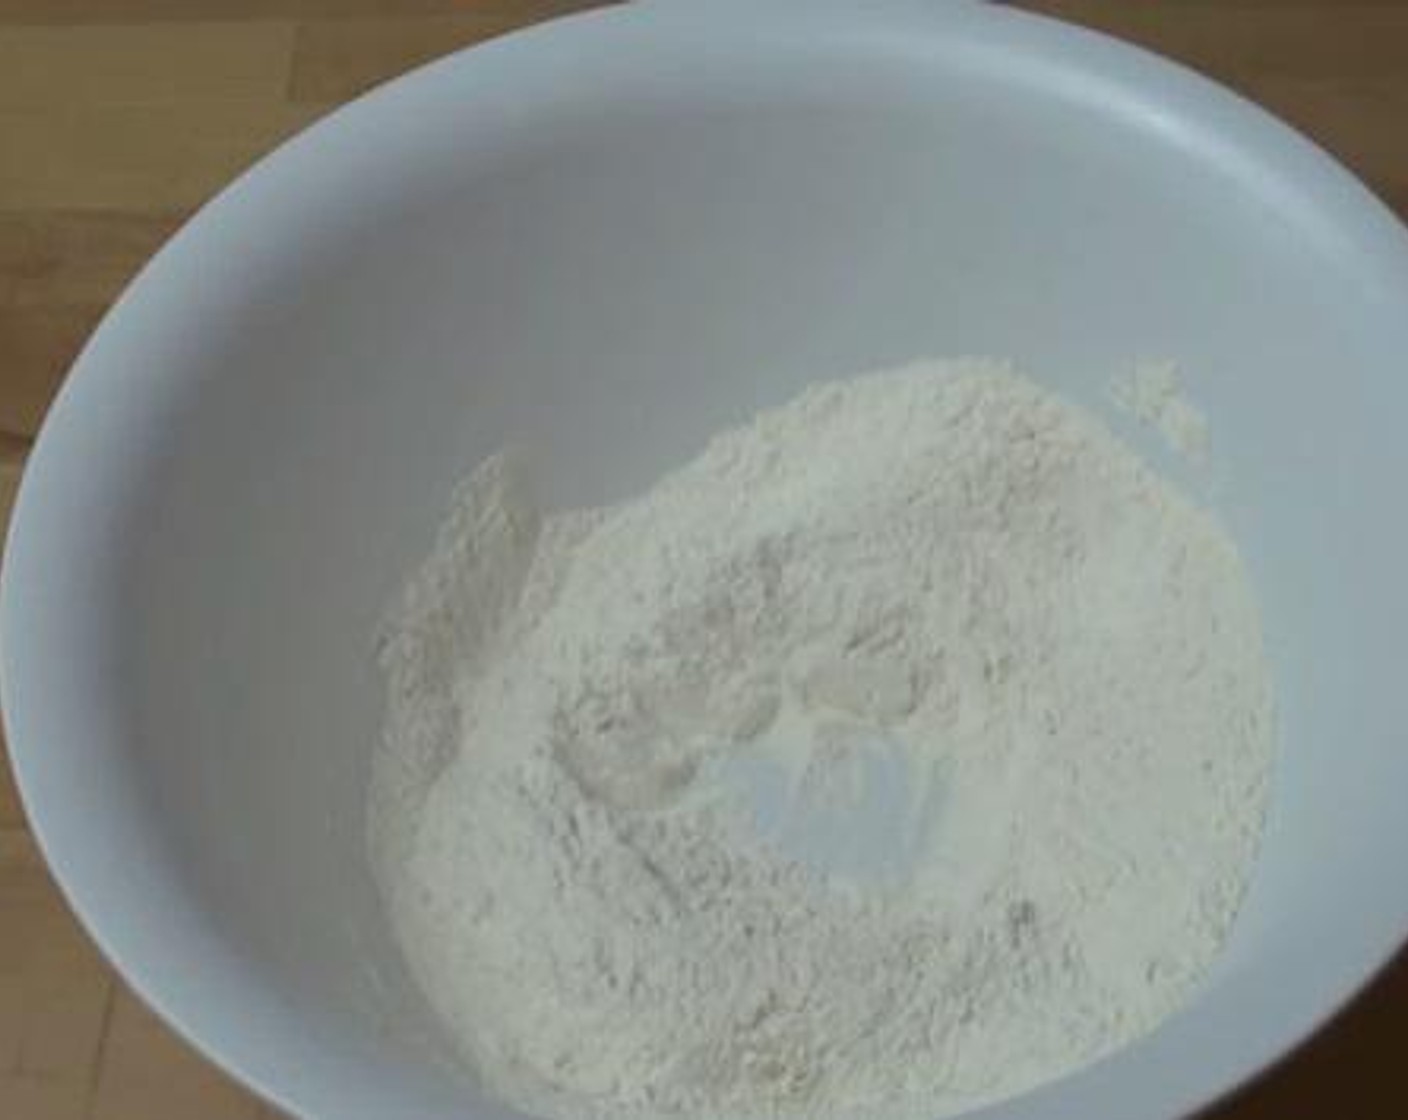 step 1 In a mixing flour, mix together the Self-Rising Flour (2 cups), Caster Sugar (1/4 cup), and Baking Soda (1/4 tsp). Stir the mixture well.